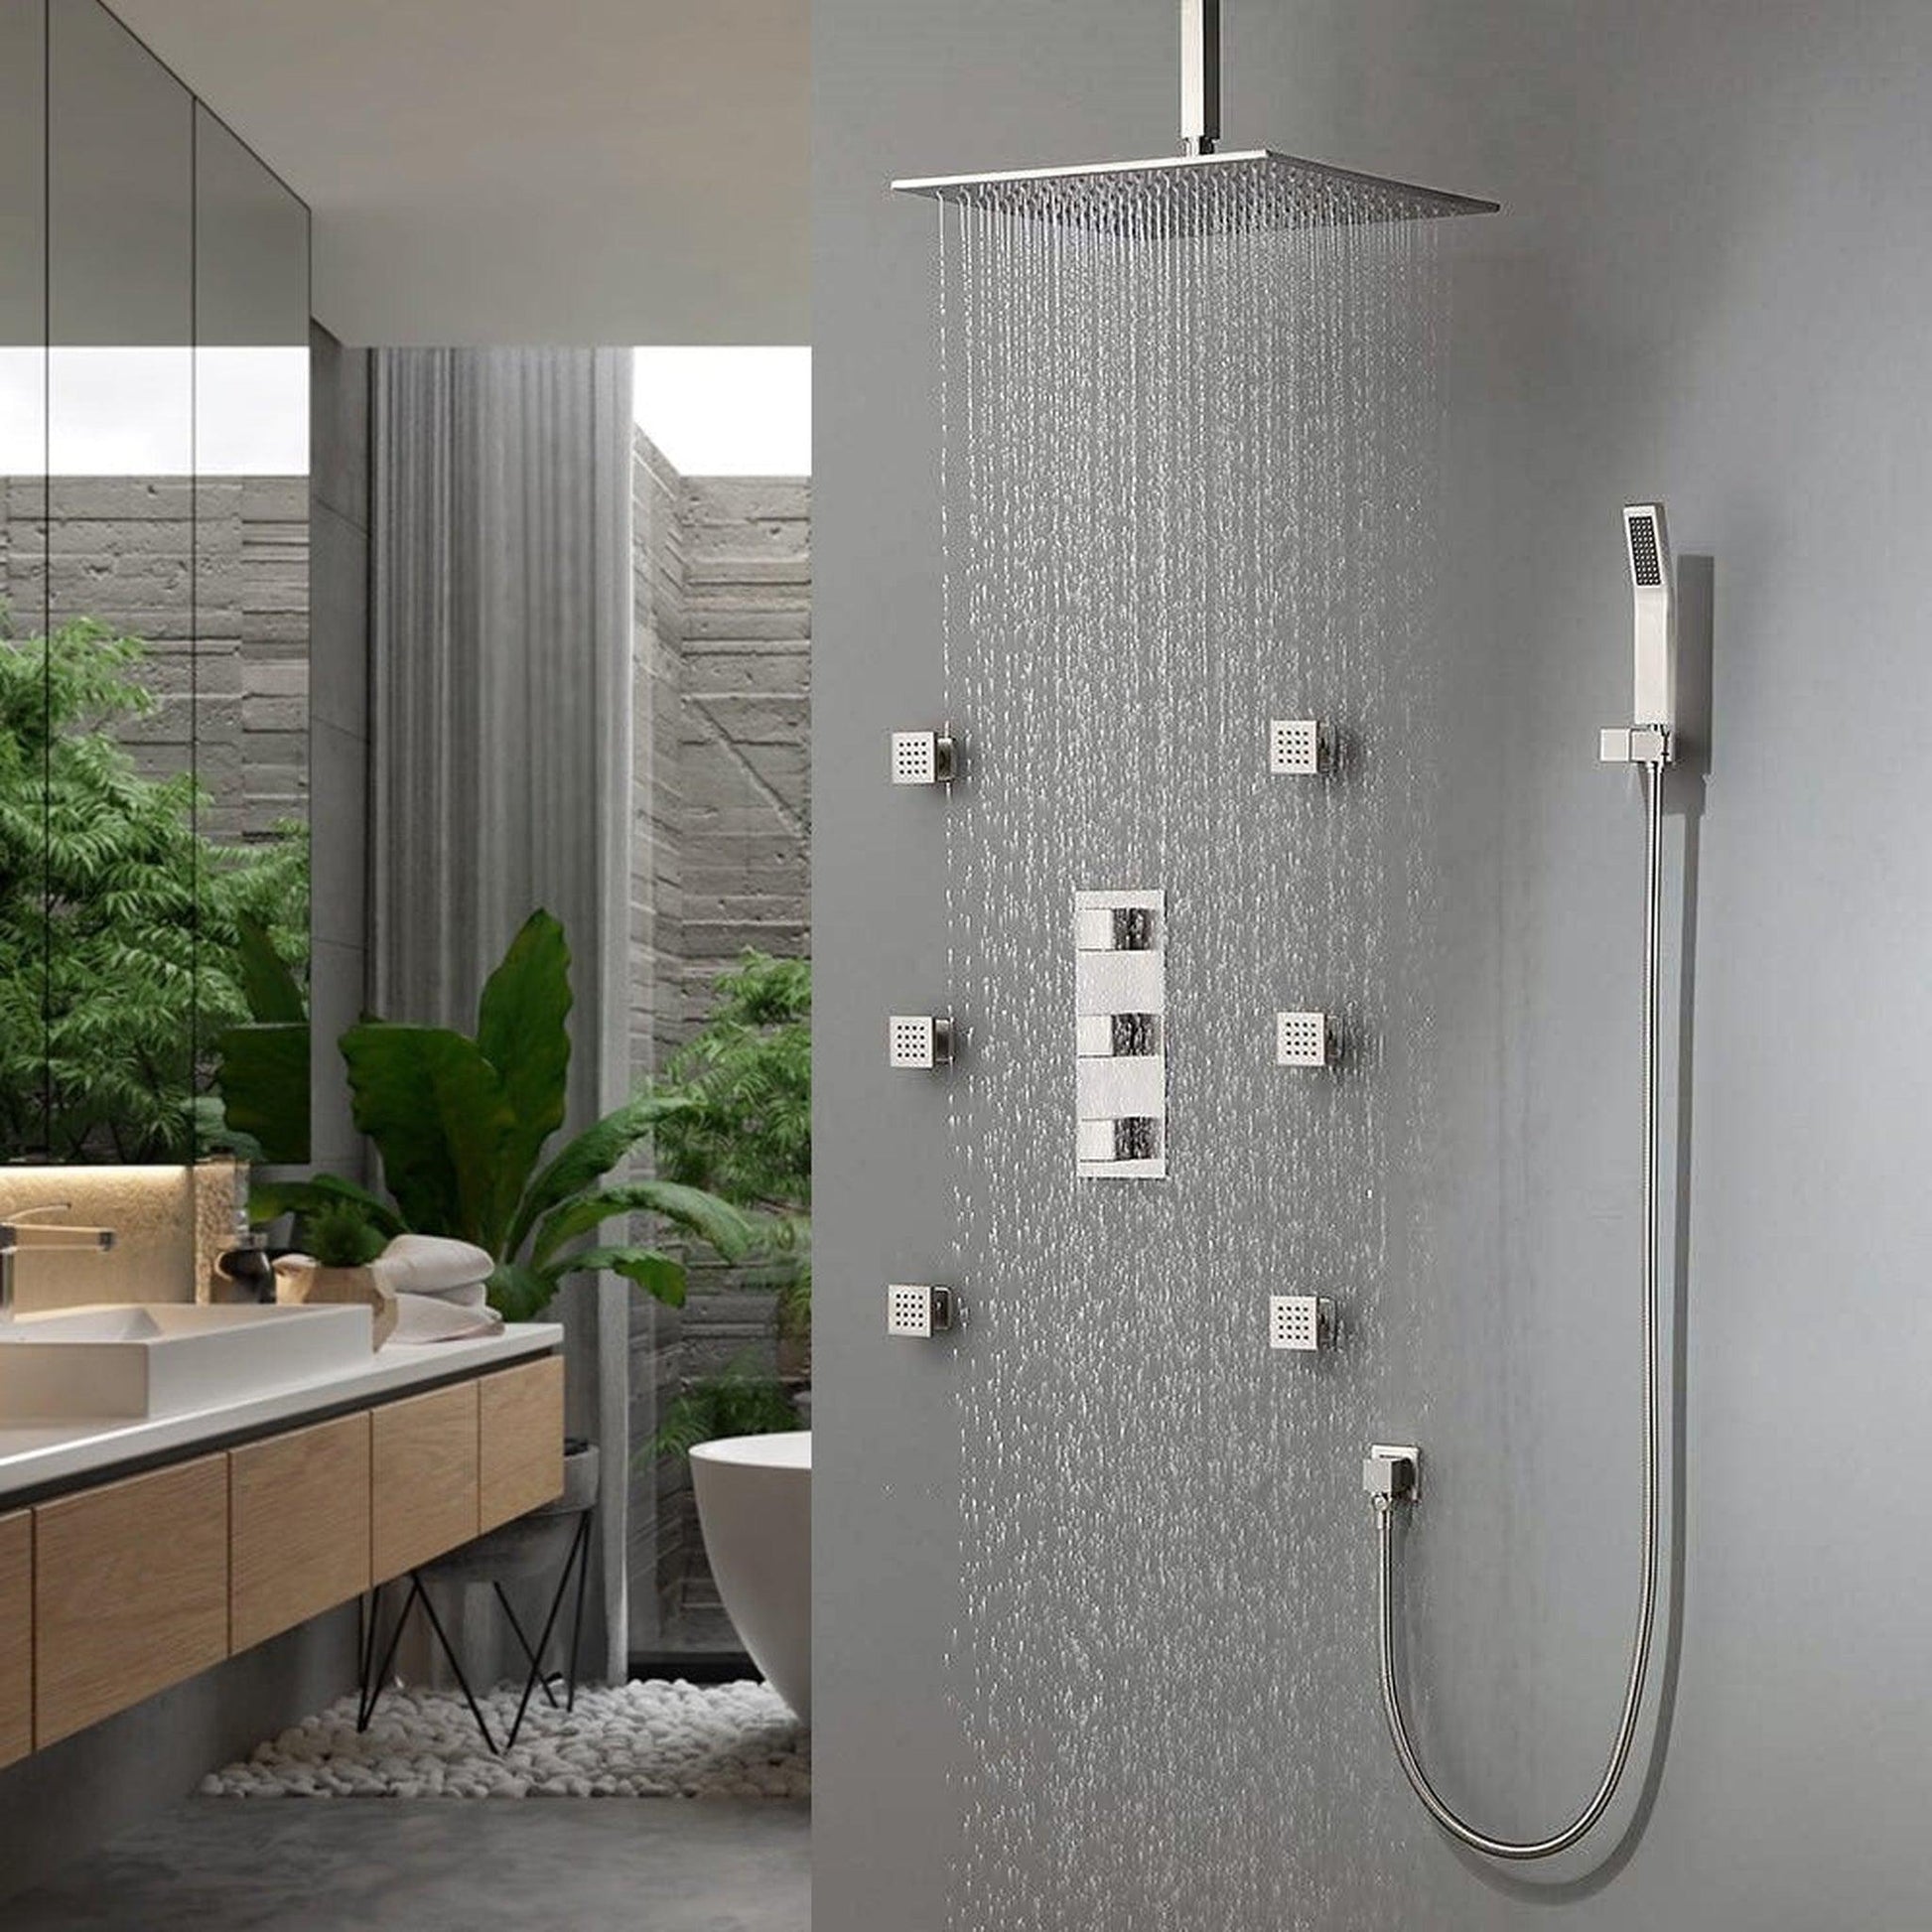 Fontana 10" Chrome Square Ceiling Mounted Thermostatic Rainfall Shower Set With 6-Jet Body Sprays and Hand Shower